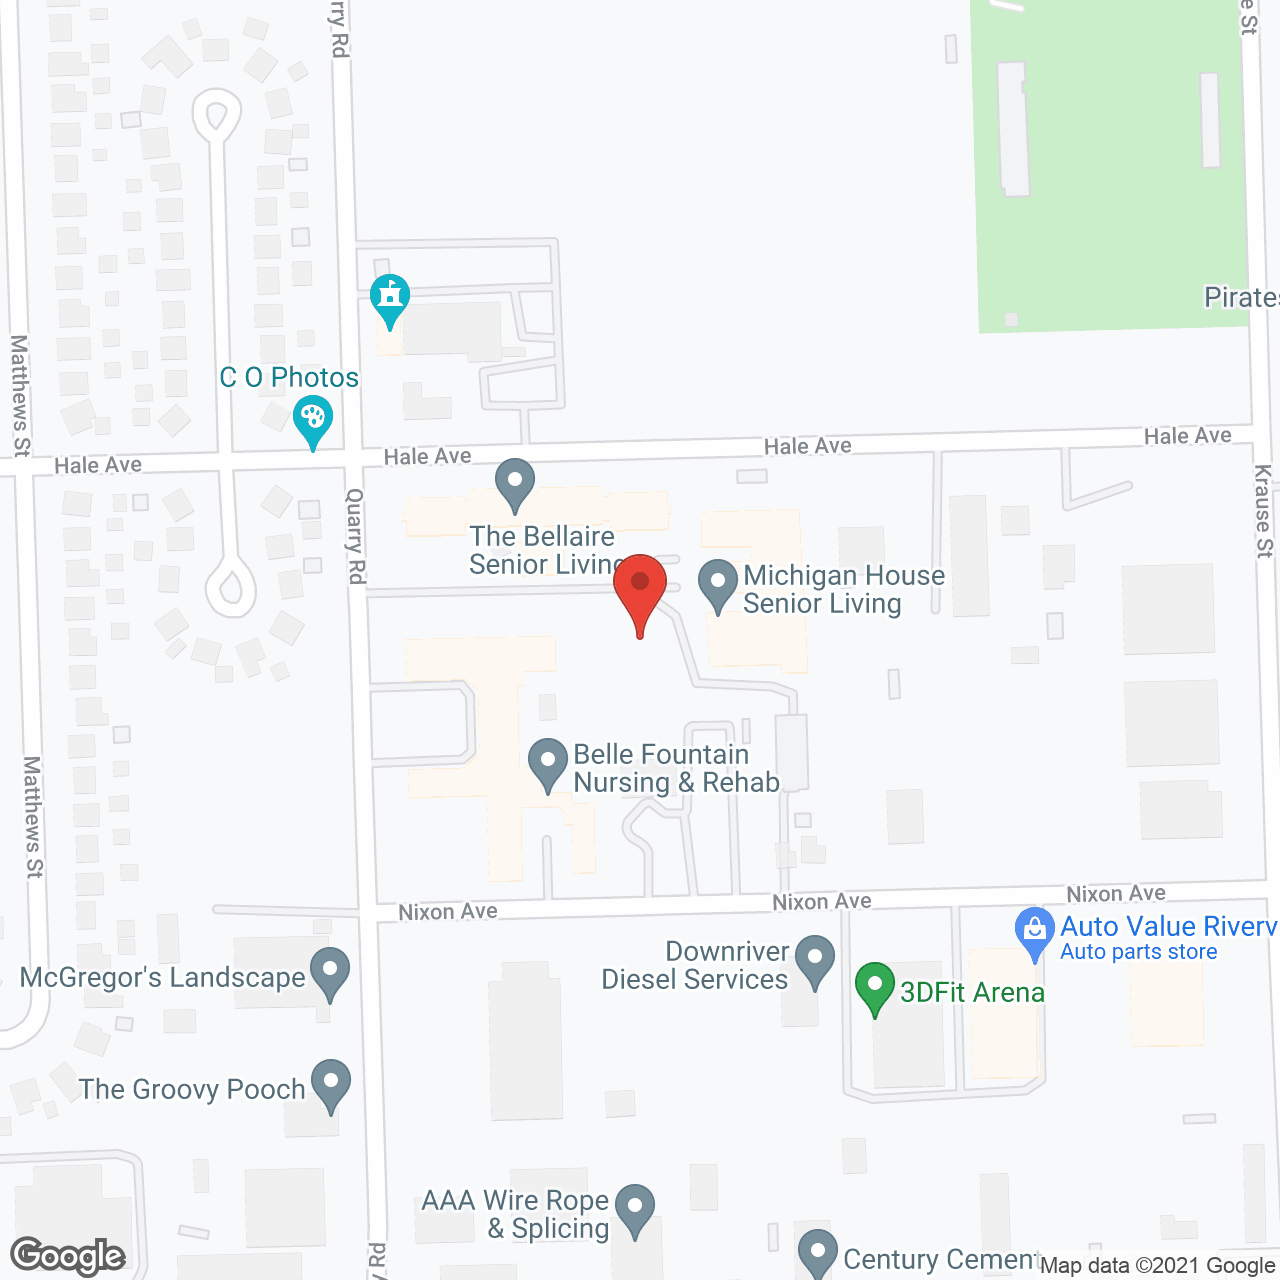 The Bellaire Senior Living in google map